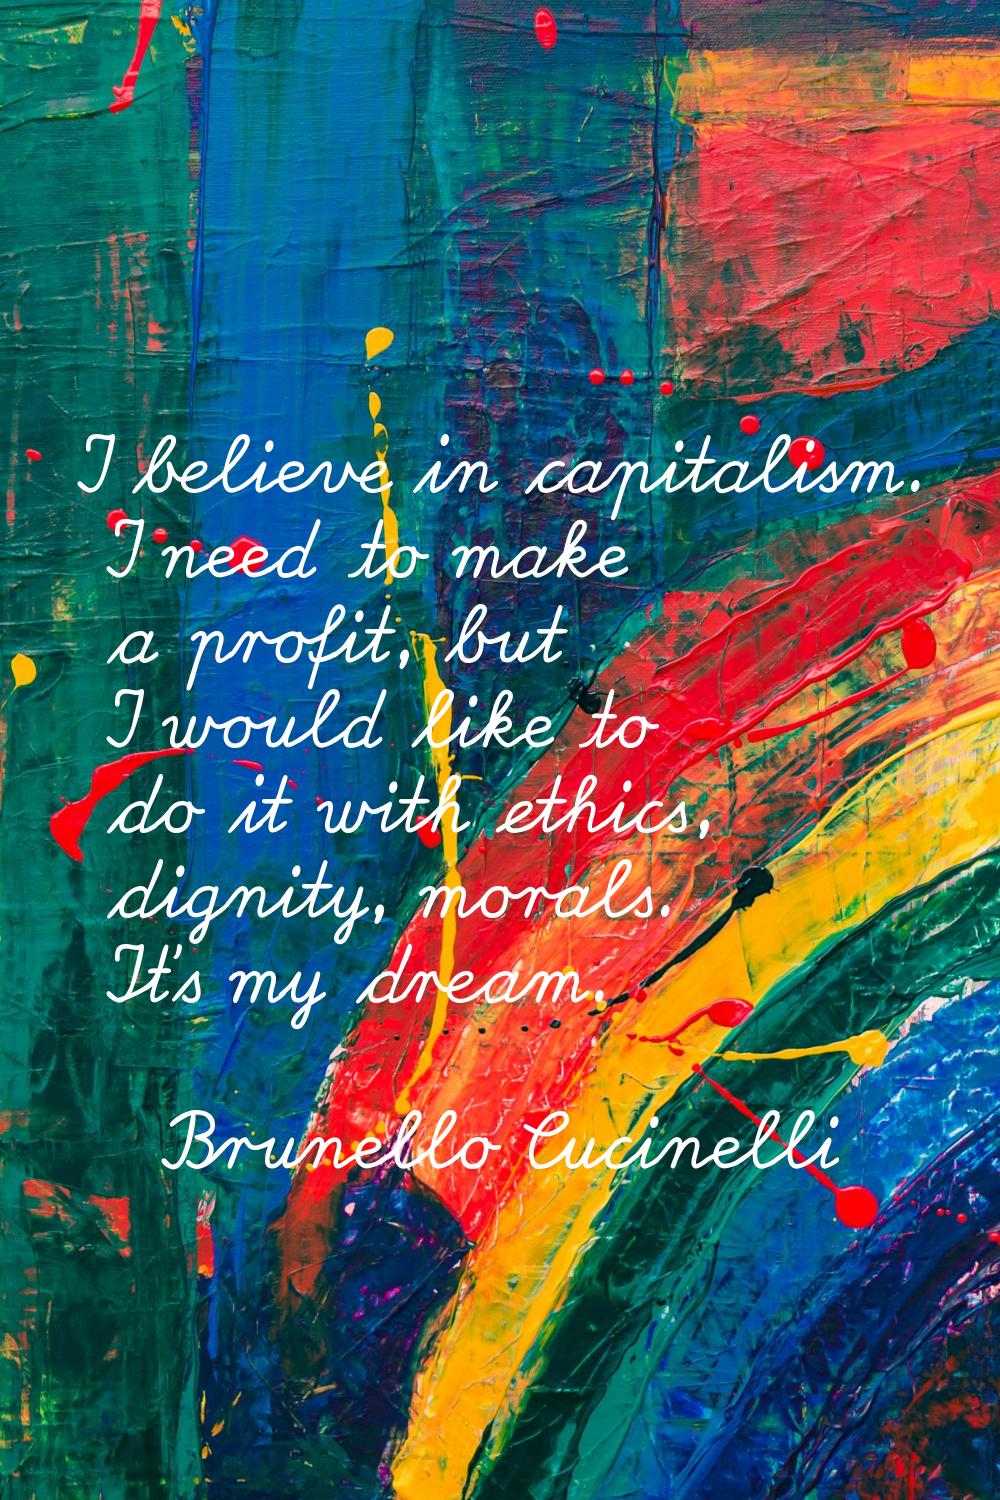 I believe in capitalism. I need to make a profit, but I would like to do it with ethics, dignity, m